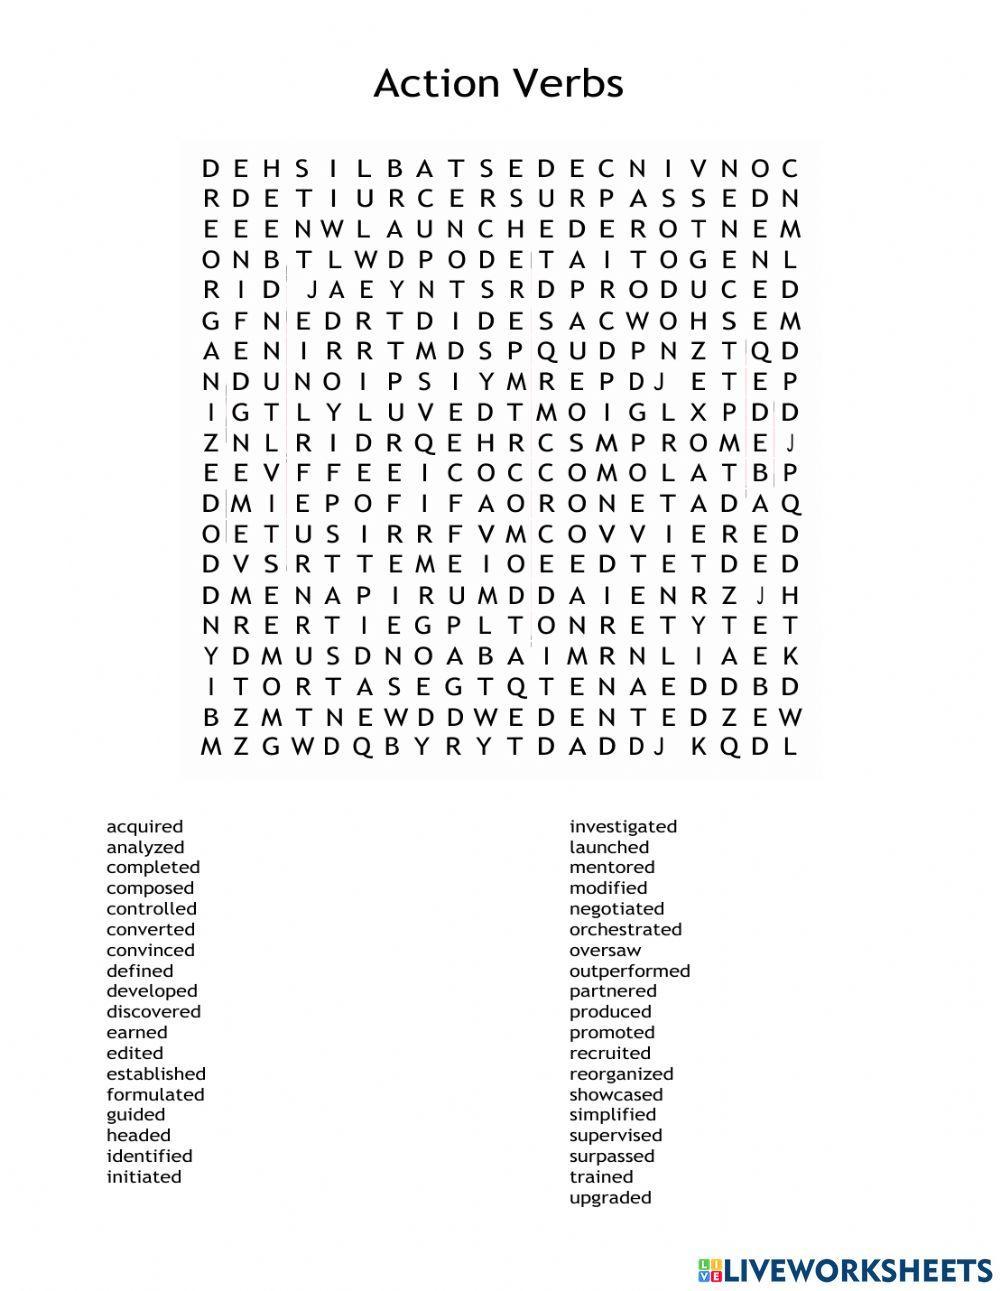 Action verbs Wordsearch